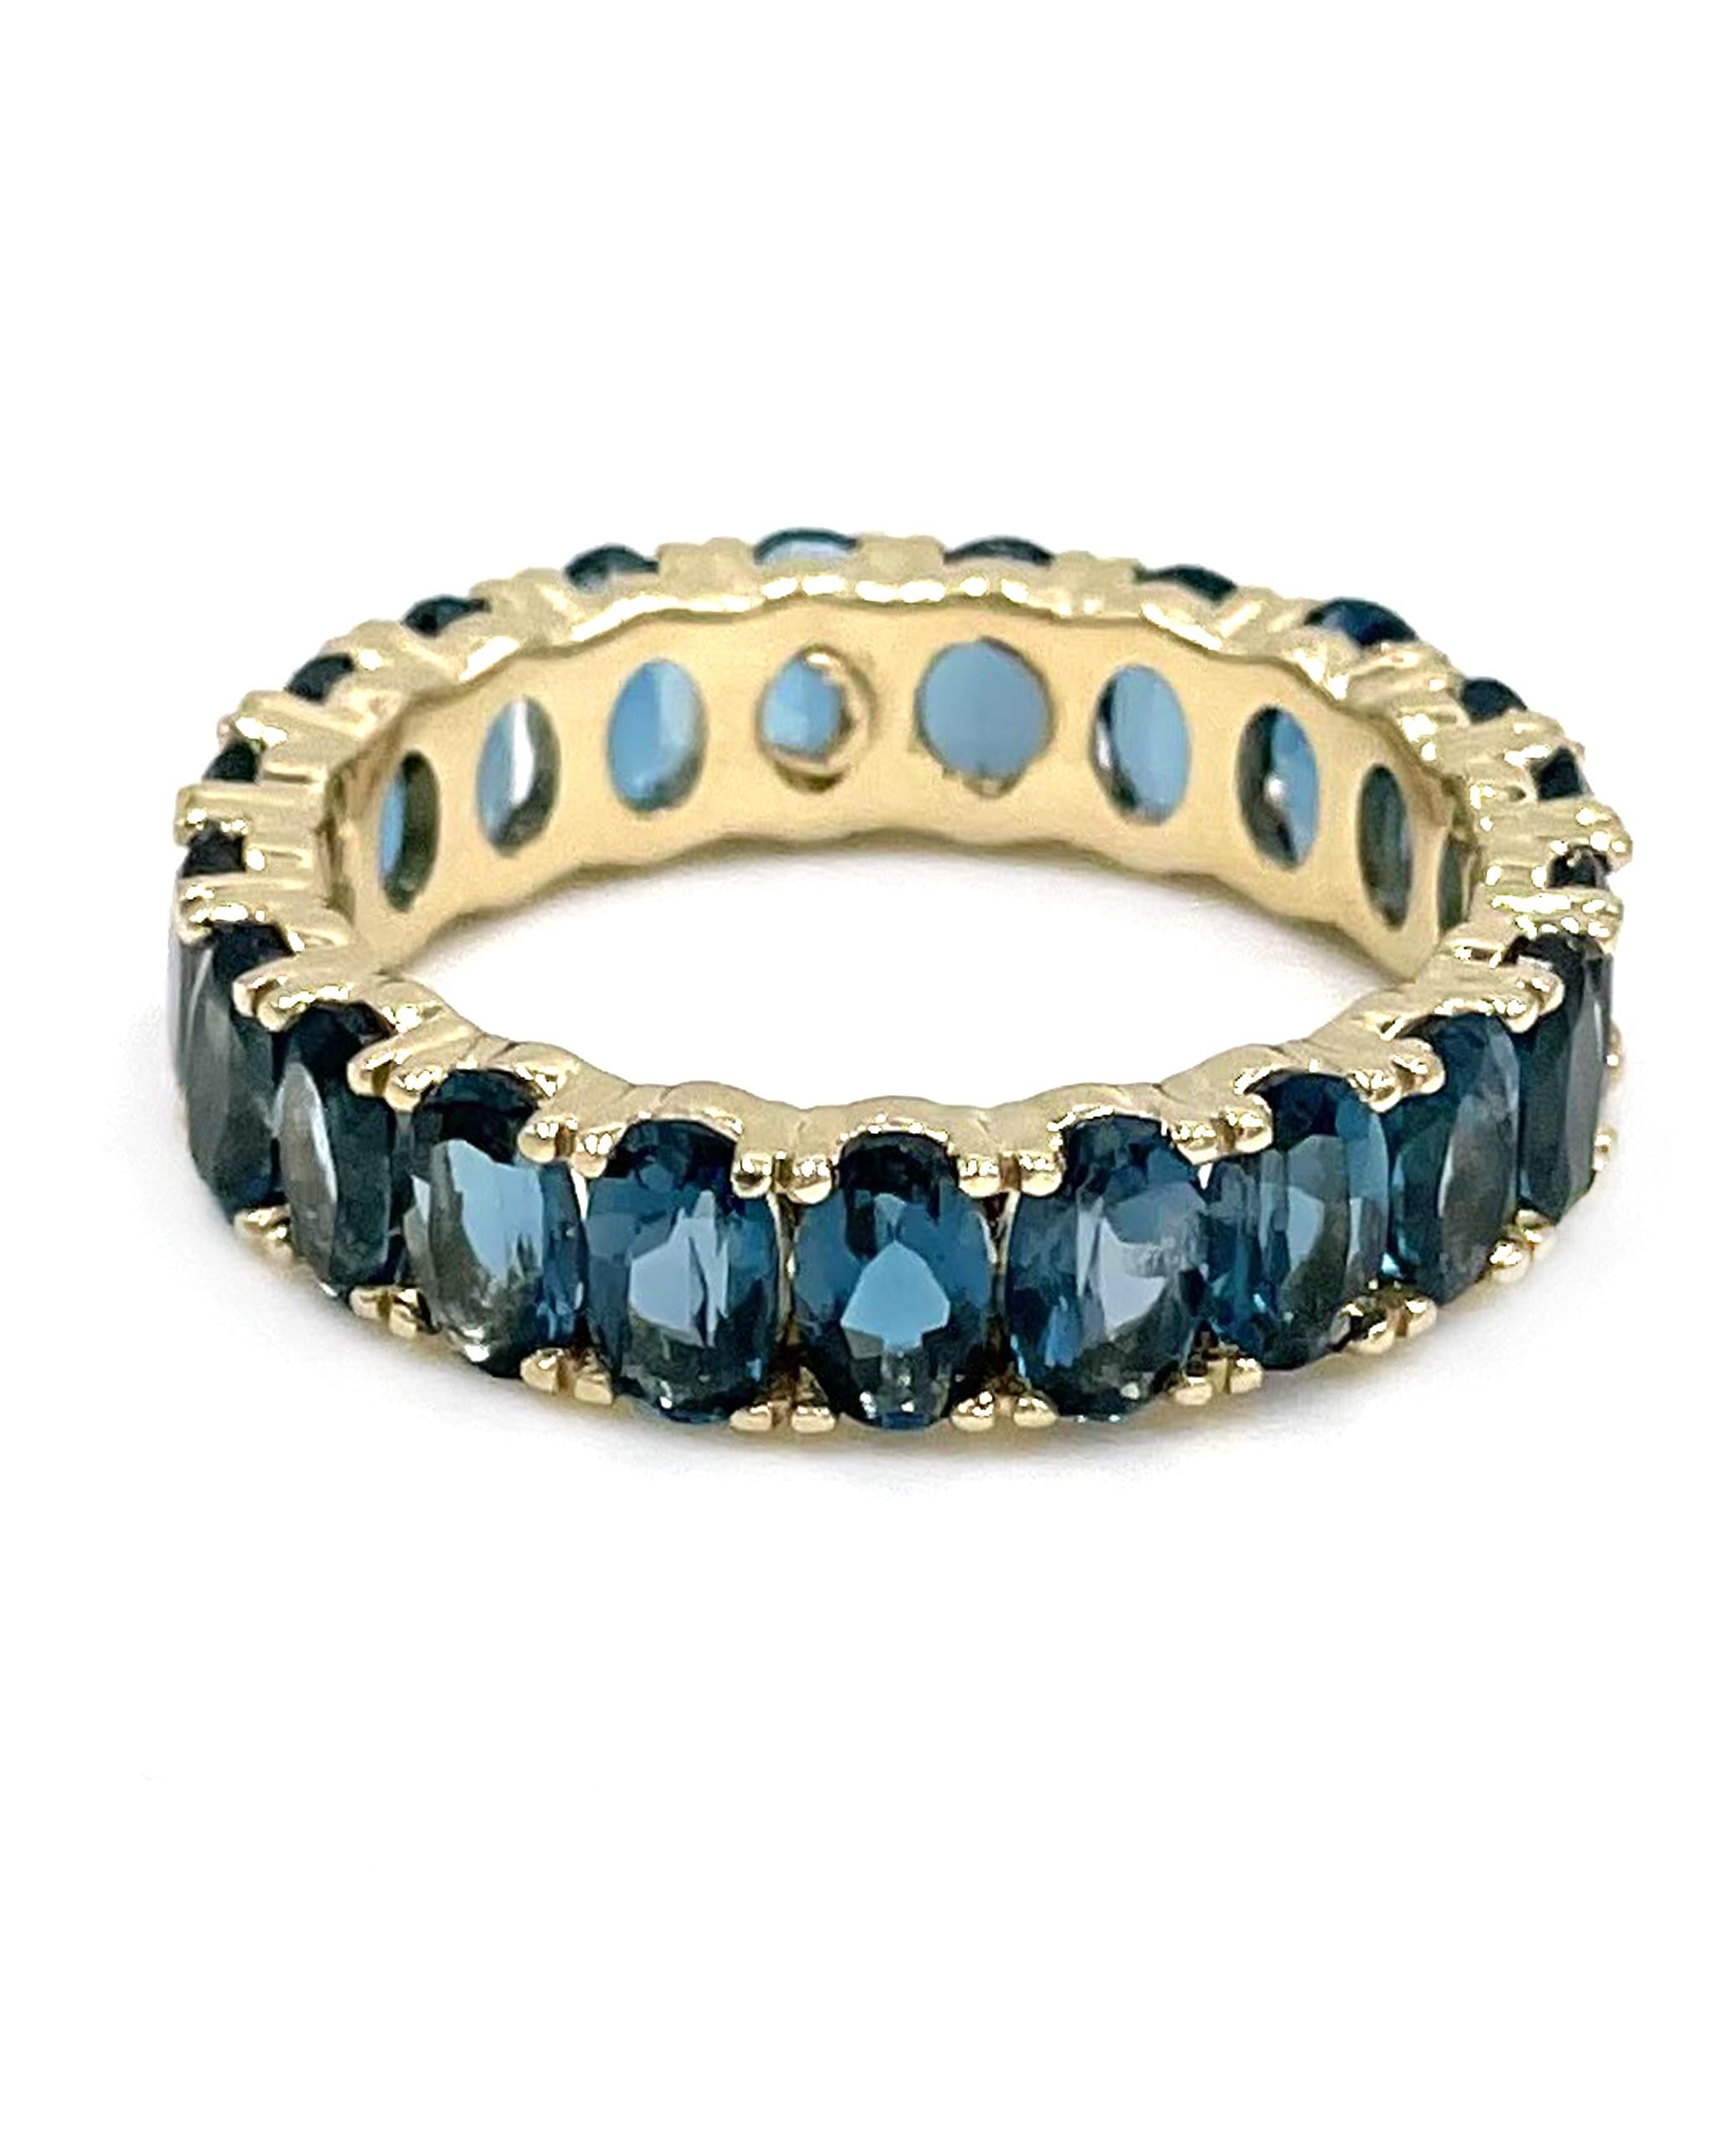 14K white gold eternity ring with 21 oval shaped London blue topaz 5.71 carats total weight.

* Finger size 8
* 5.10mm wide